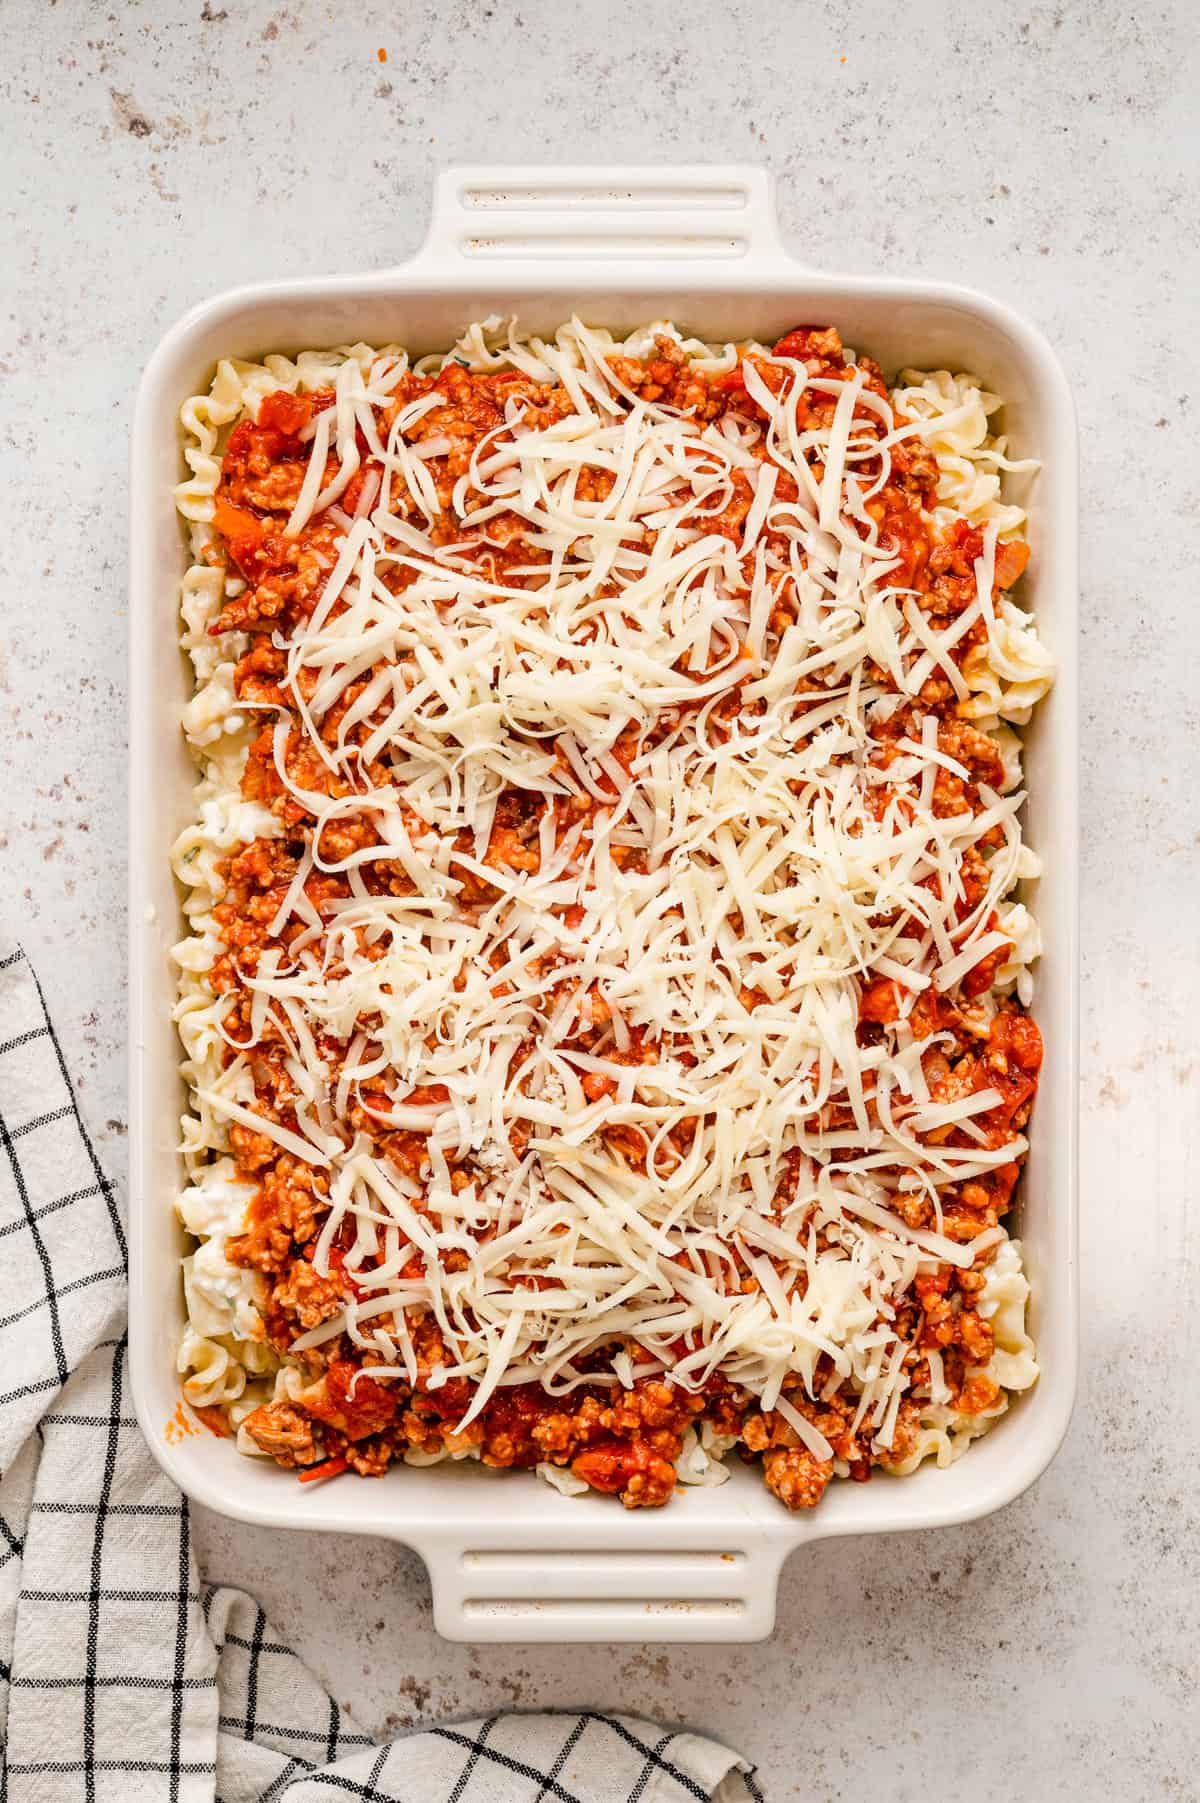 Adding shredded cheese to Lasagna Casserole before baking